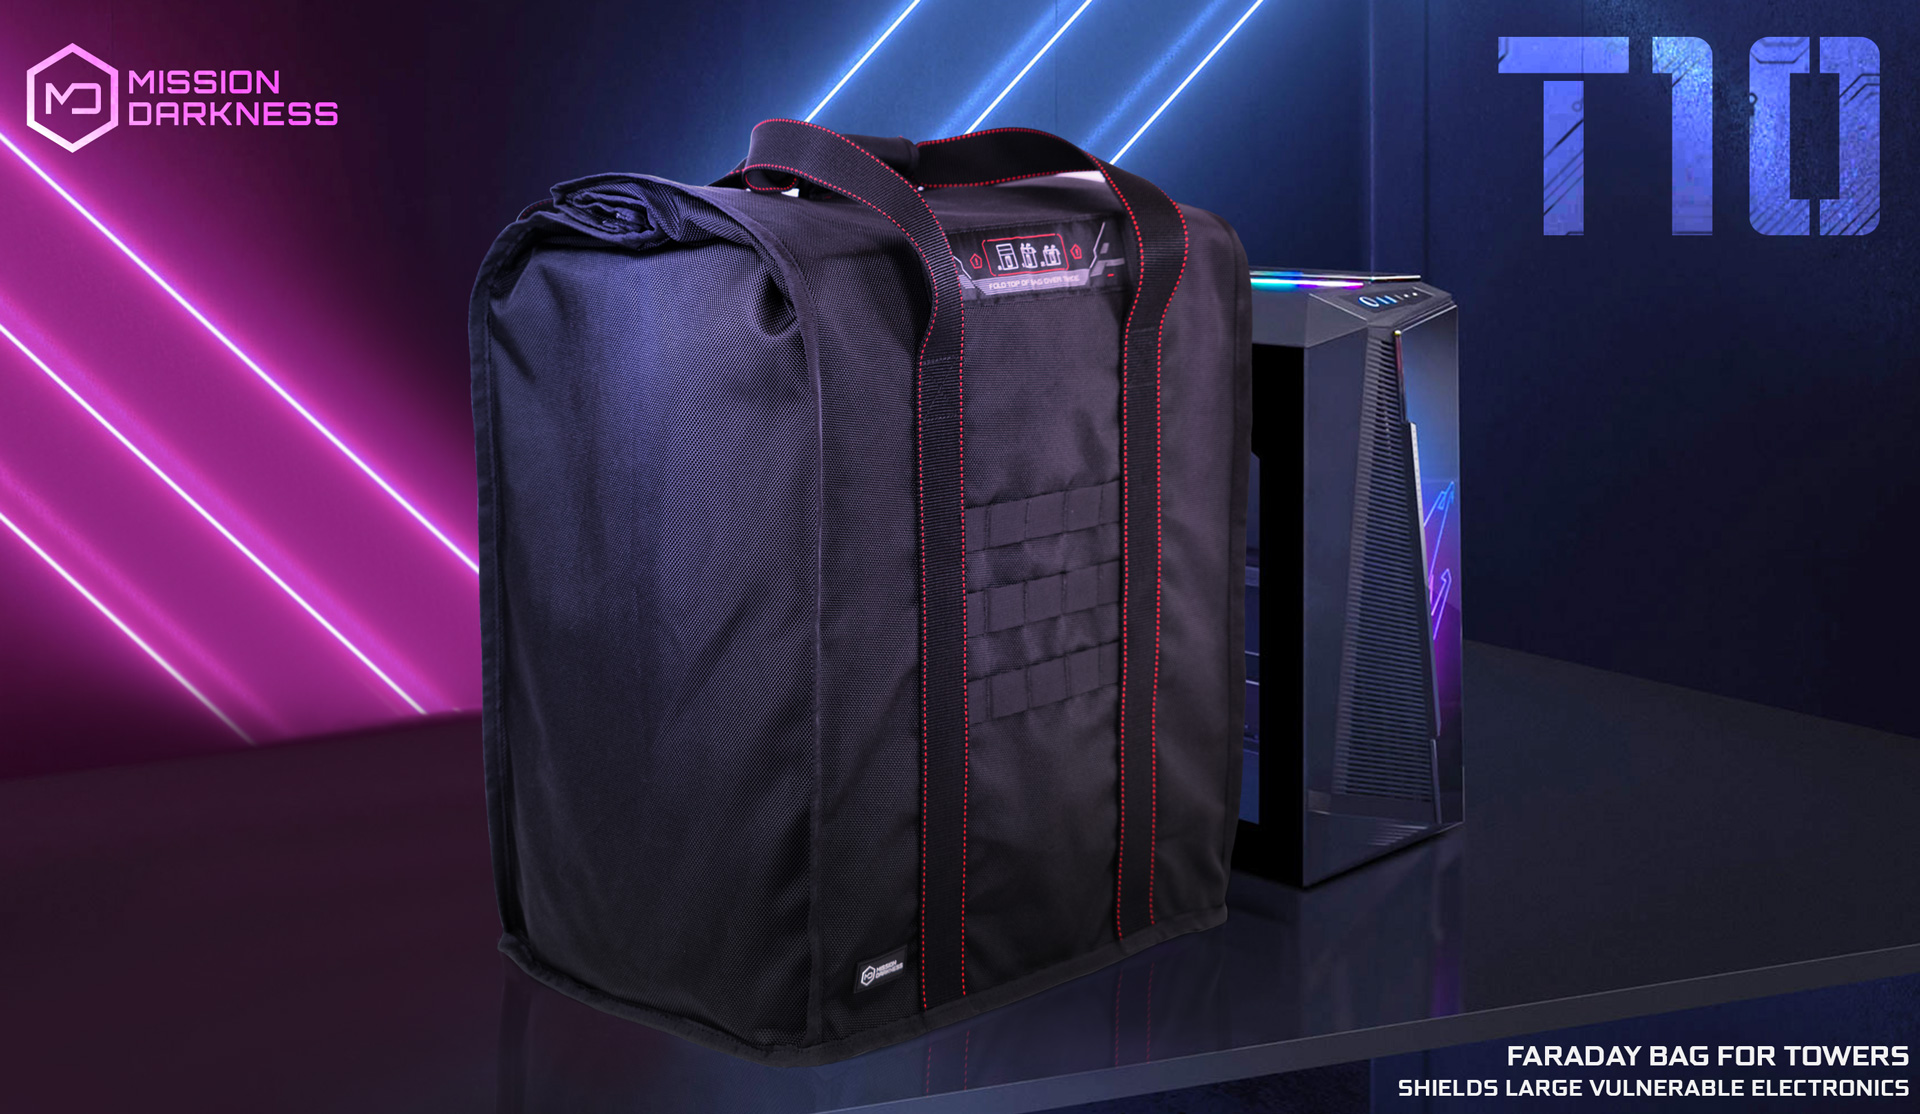 MISSION DARKNESS T10 Faraday Bag for Towers - CDFS - Digital Forensic  Products, Training & Services